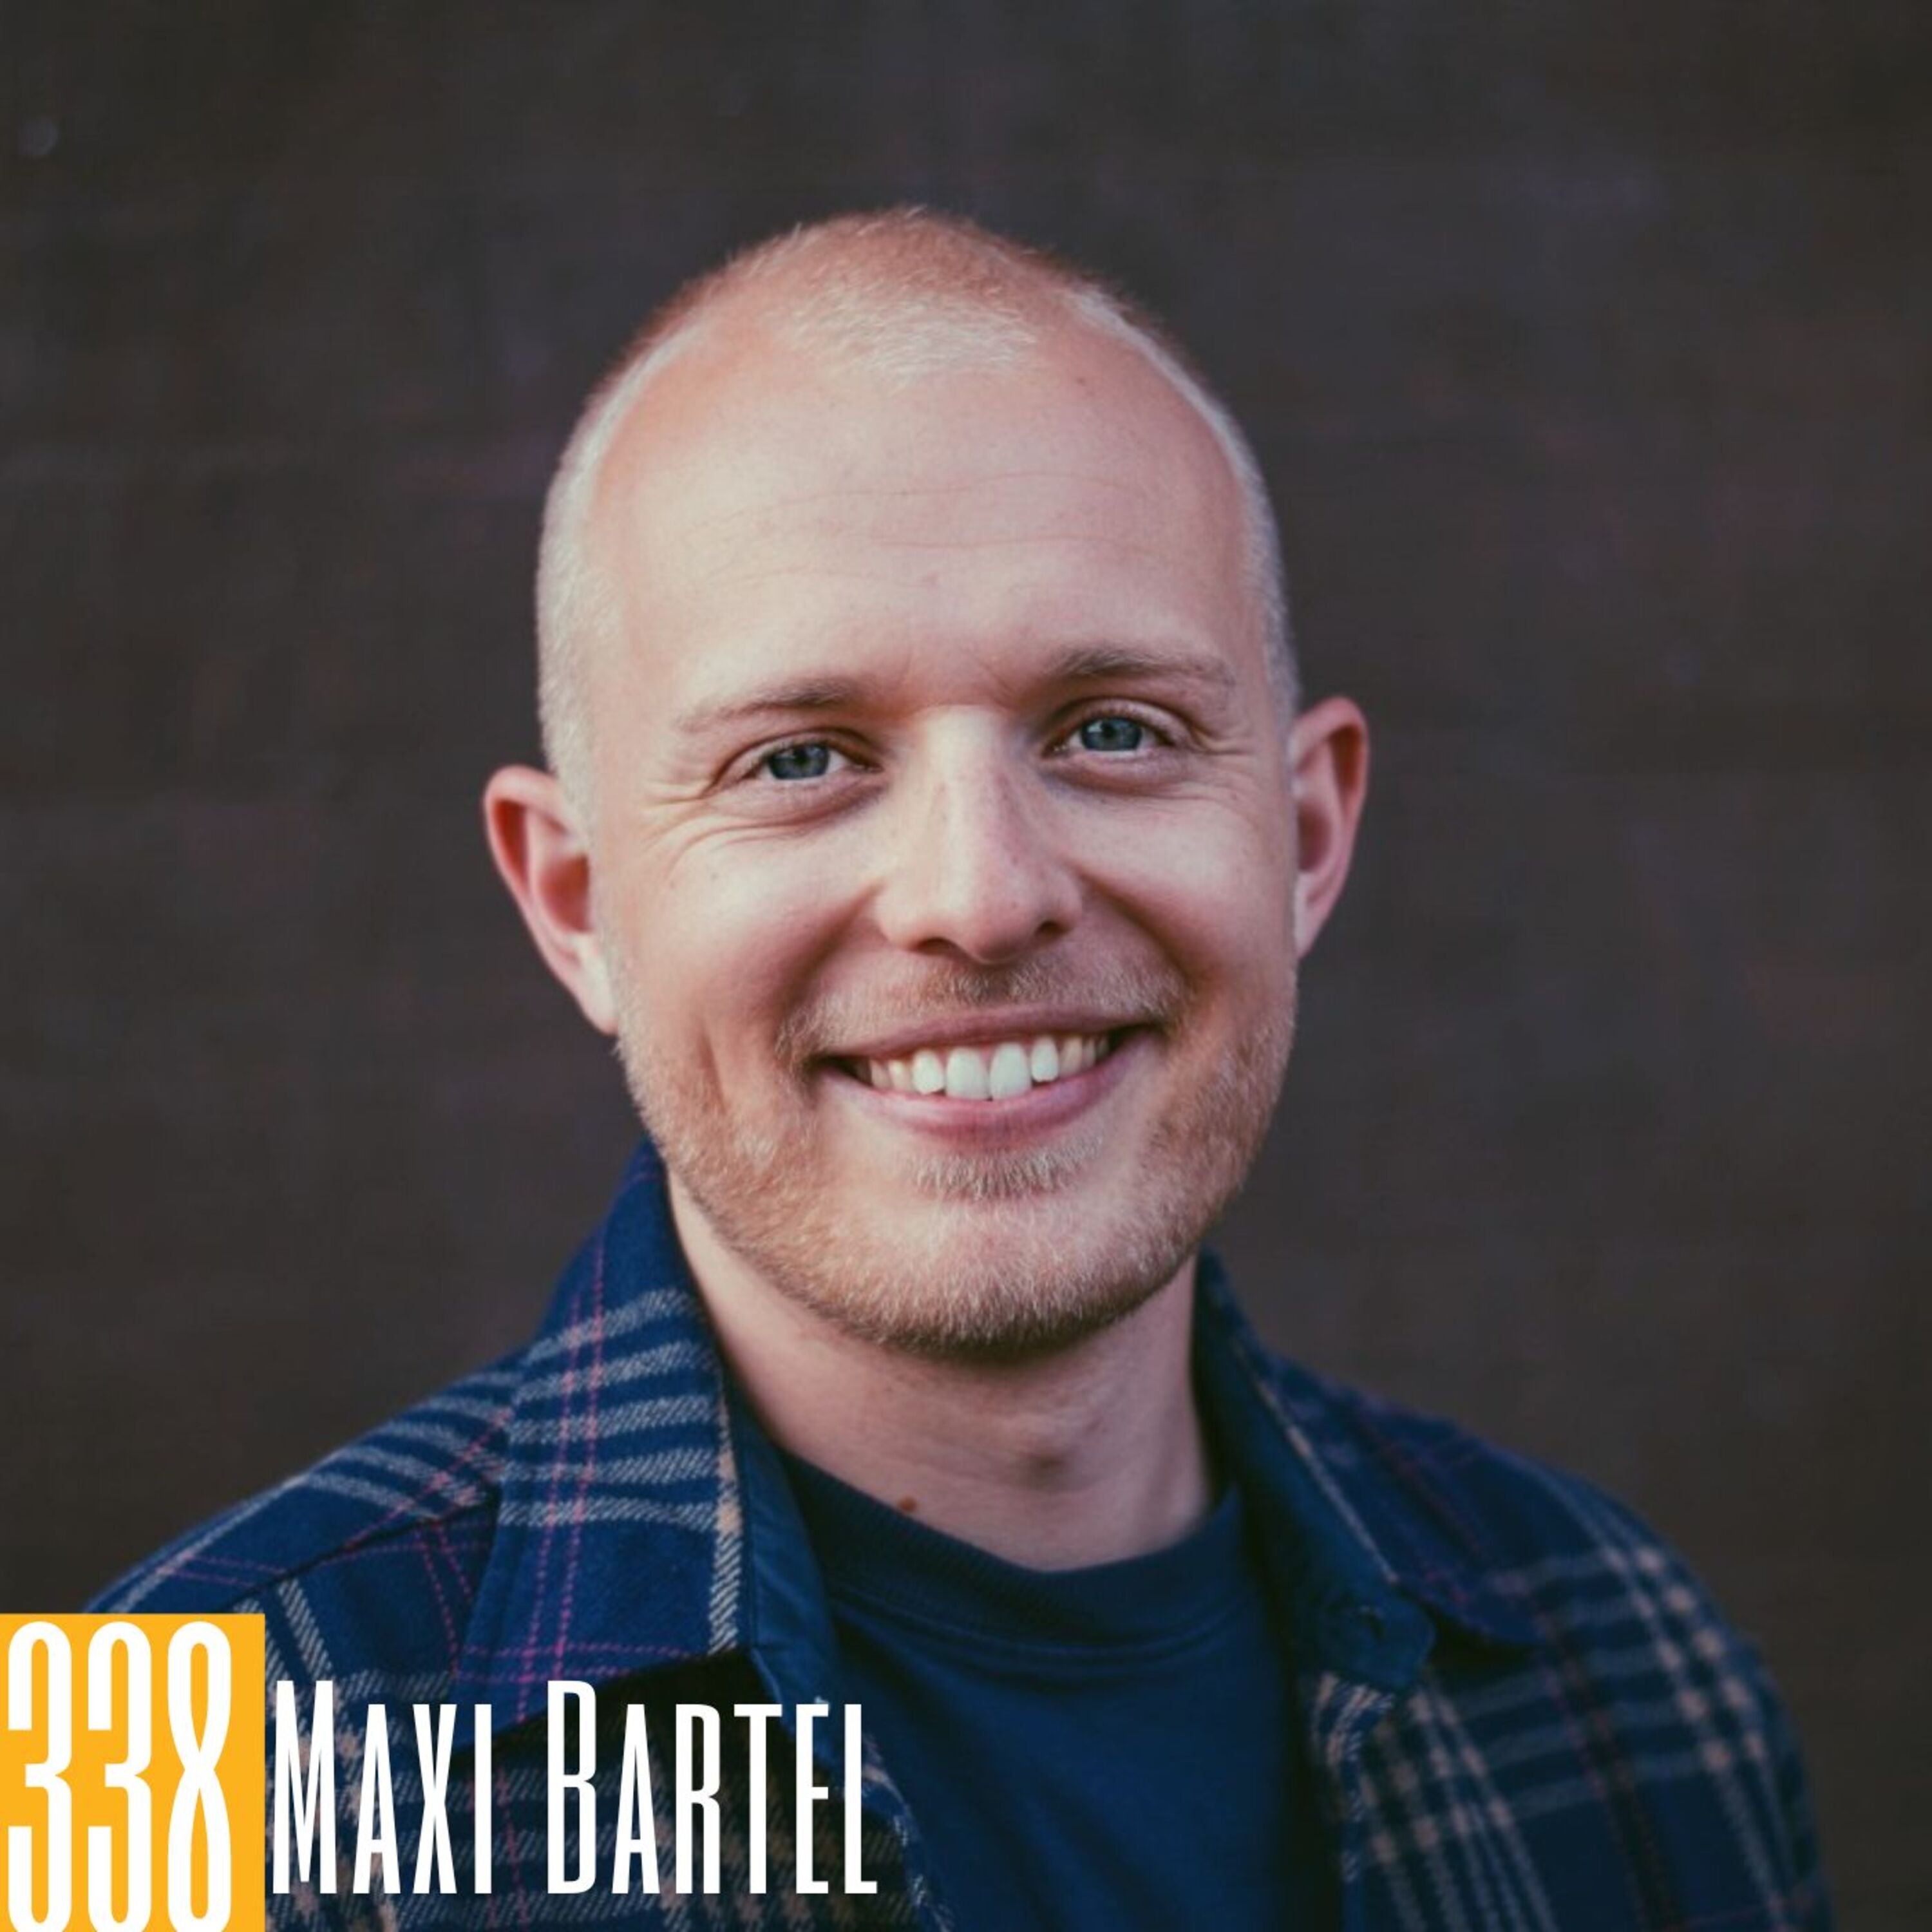 338 Maxi Bartel - Brotherhood and Transformation: A Deep Dive into Self-Discovery and Finding Our Voice